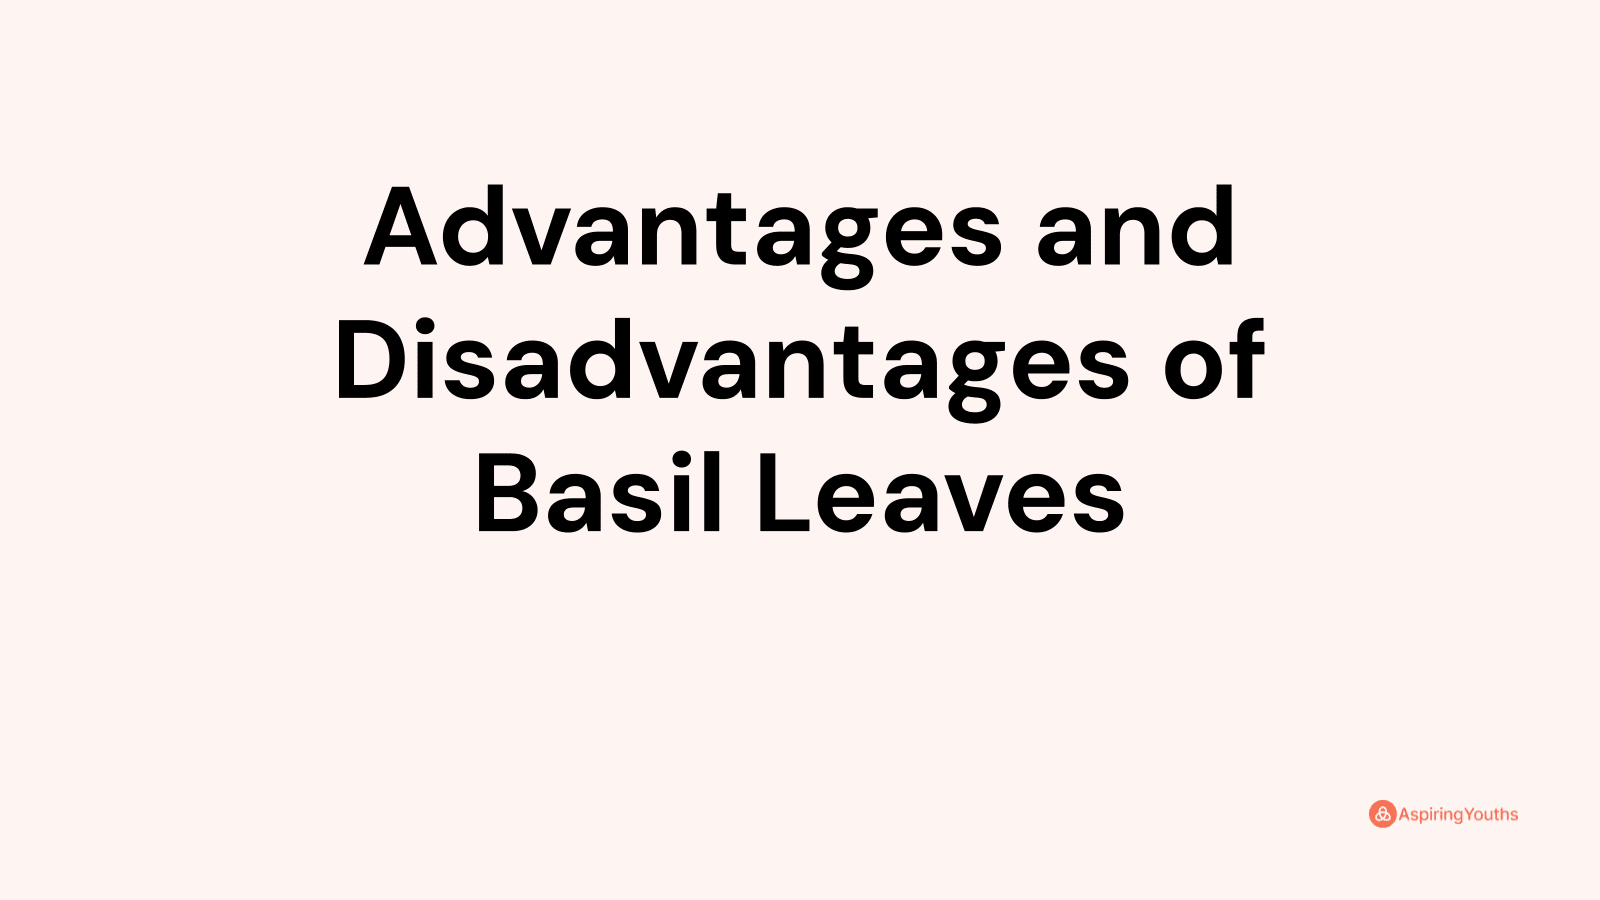 Advantages and disadvantages of Basil Leaves